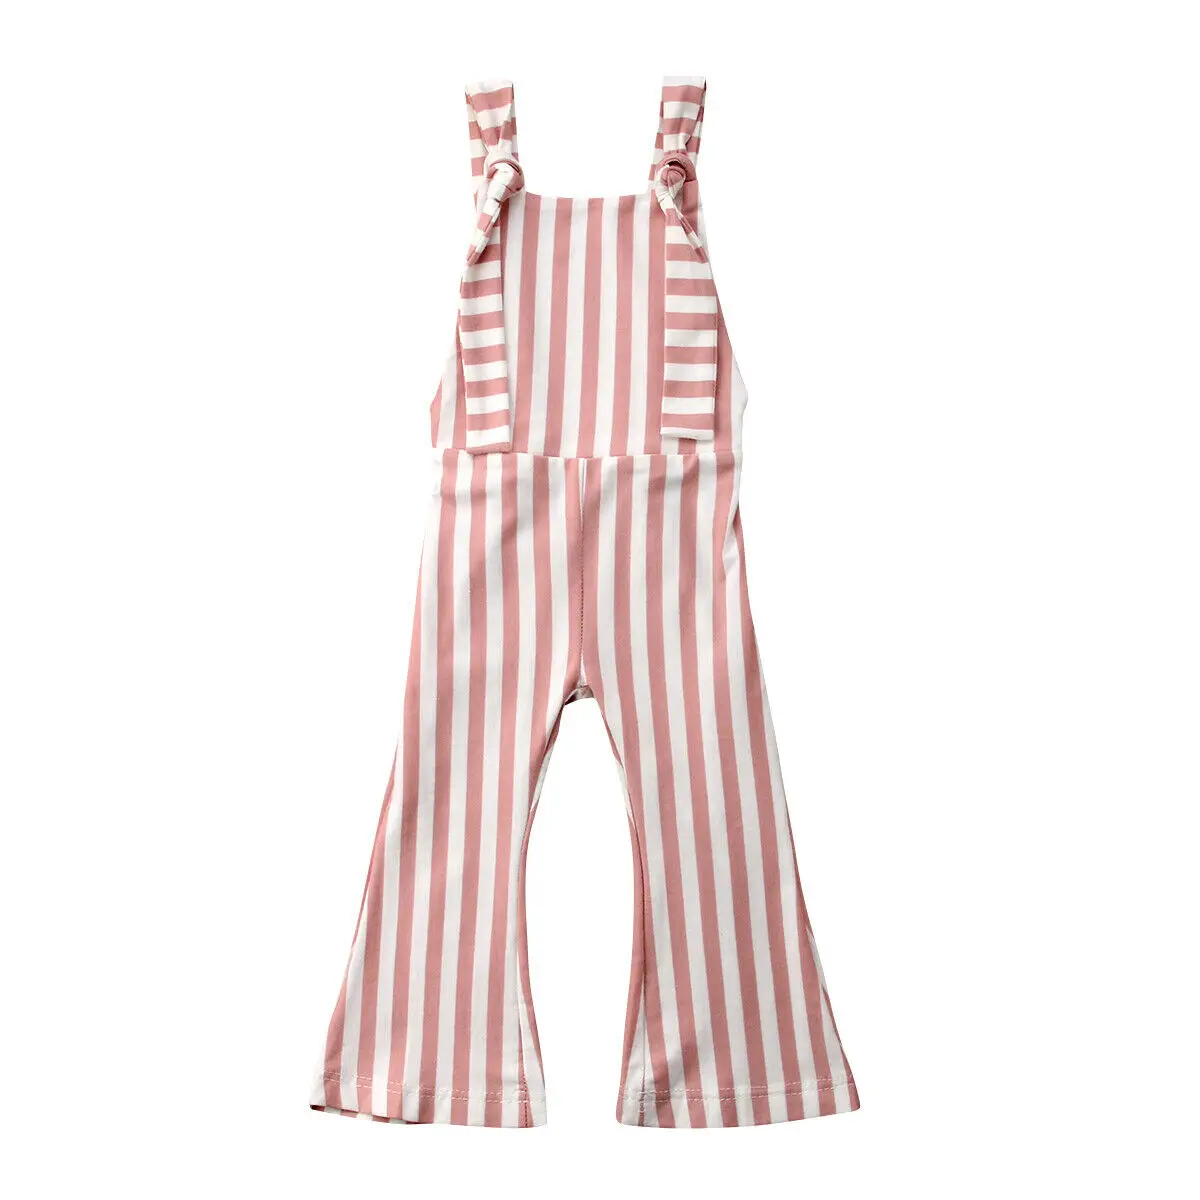 bulk baby bodysuits	 Fashion Summer Toddler Kids Baby Girls Off shoulder Stripe Romper Jumpsuits Trousers Outfits Pants 4 Colors customised baby bodysuits Baby Rompers